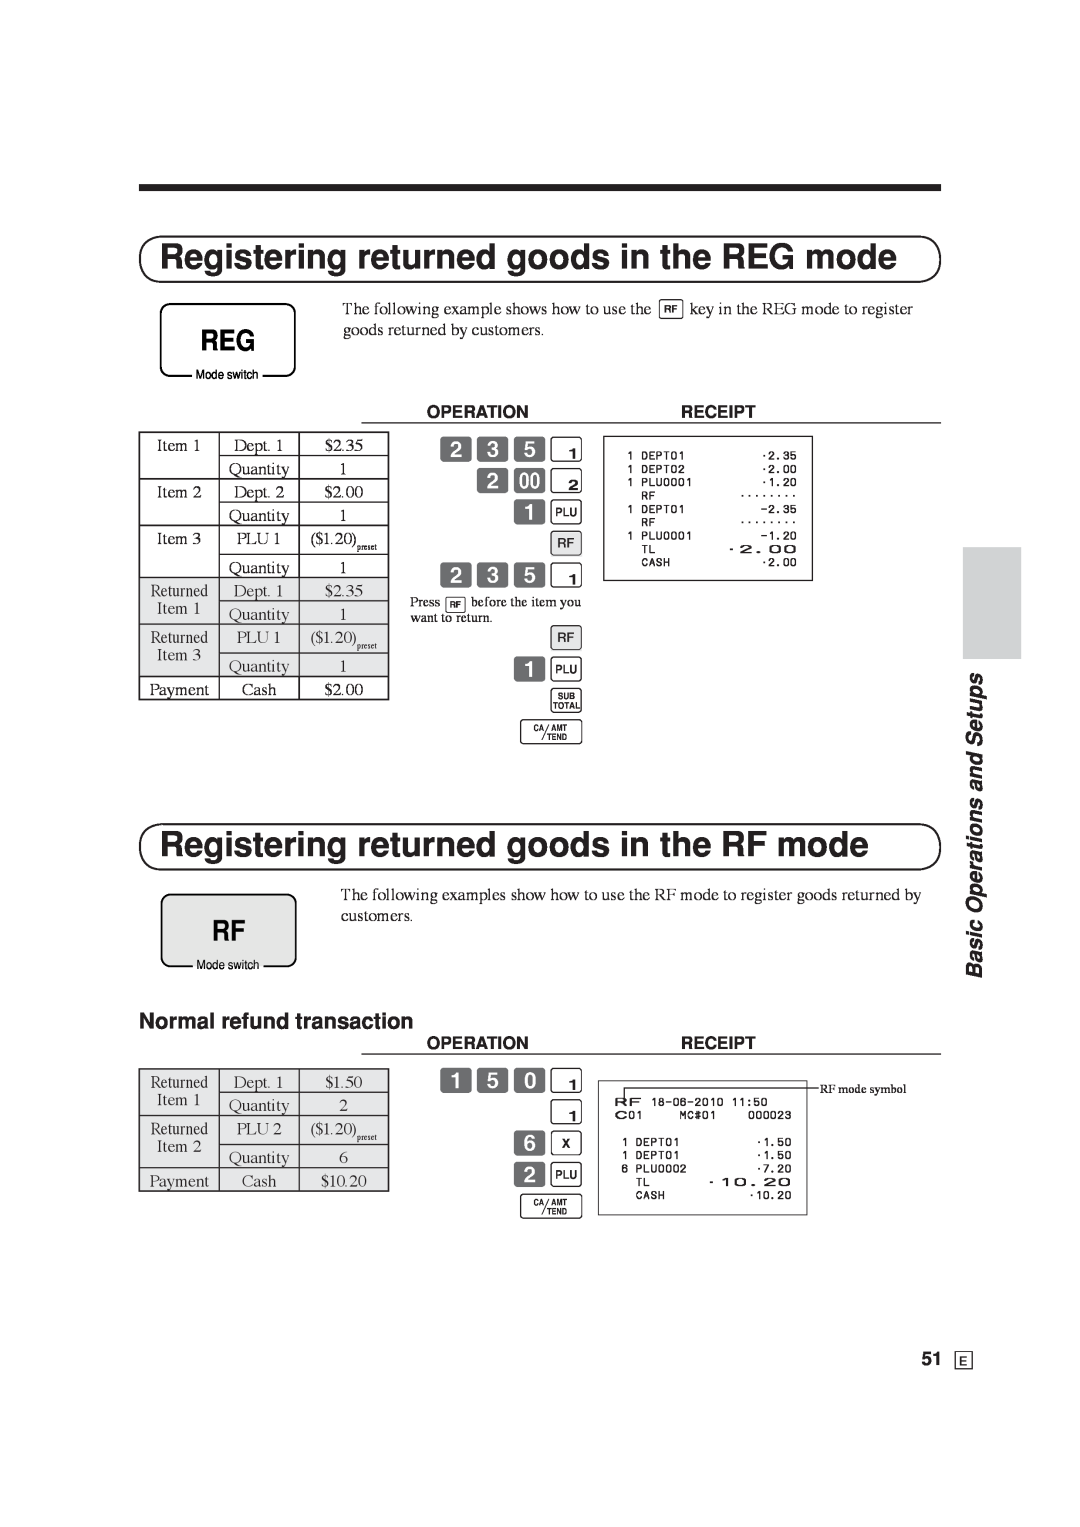 Casio SE-C6000 Registering returned goods in the REG mode, Registering returned goods in the RF mode, R 1+ s F, and Setups 